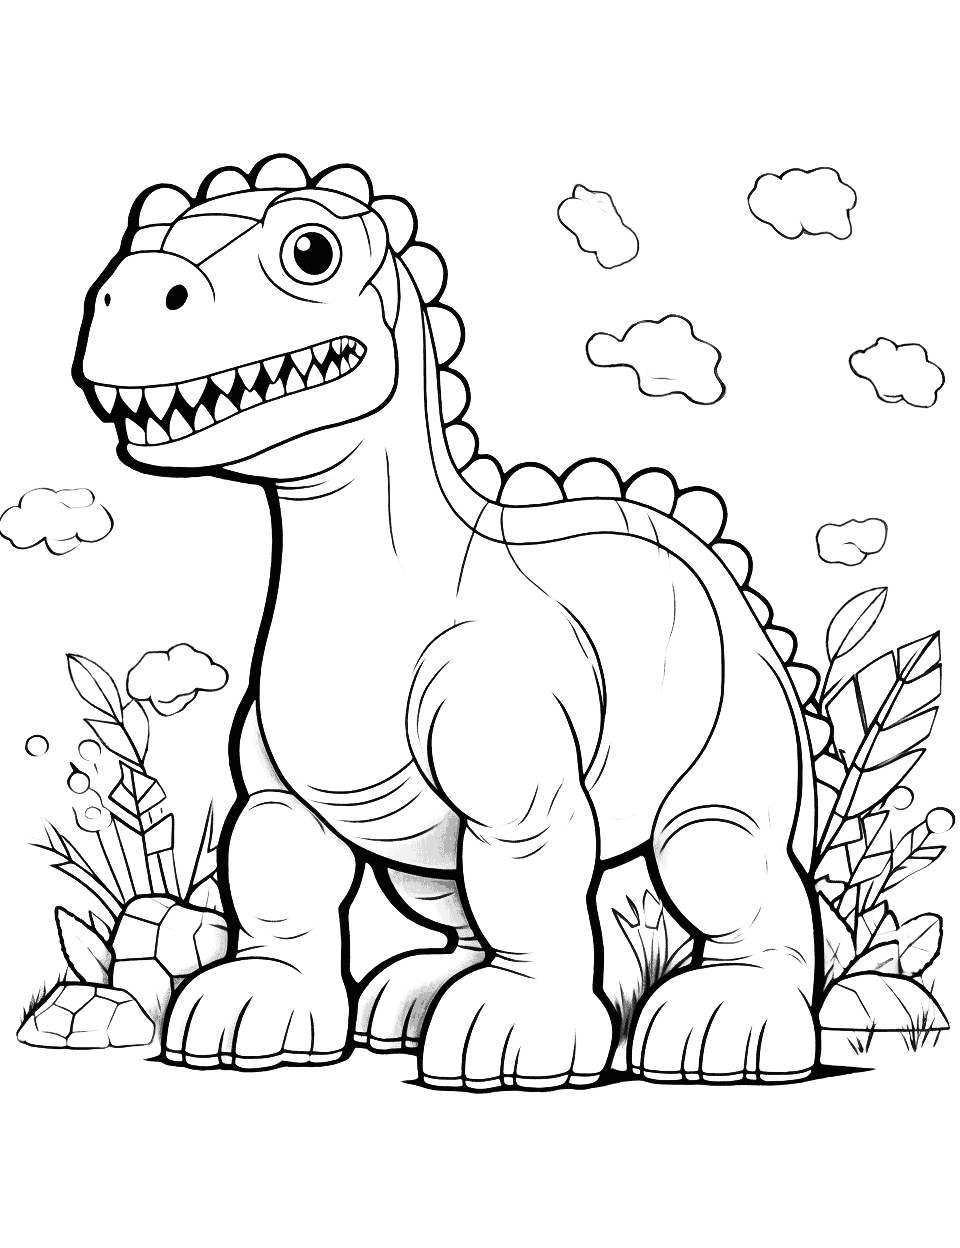 Cartoon Dinosaur Coloring Page - A coloring page featuring a cartoon-like dinosaur, in the outdoors.